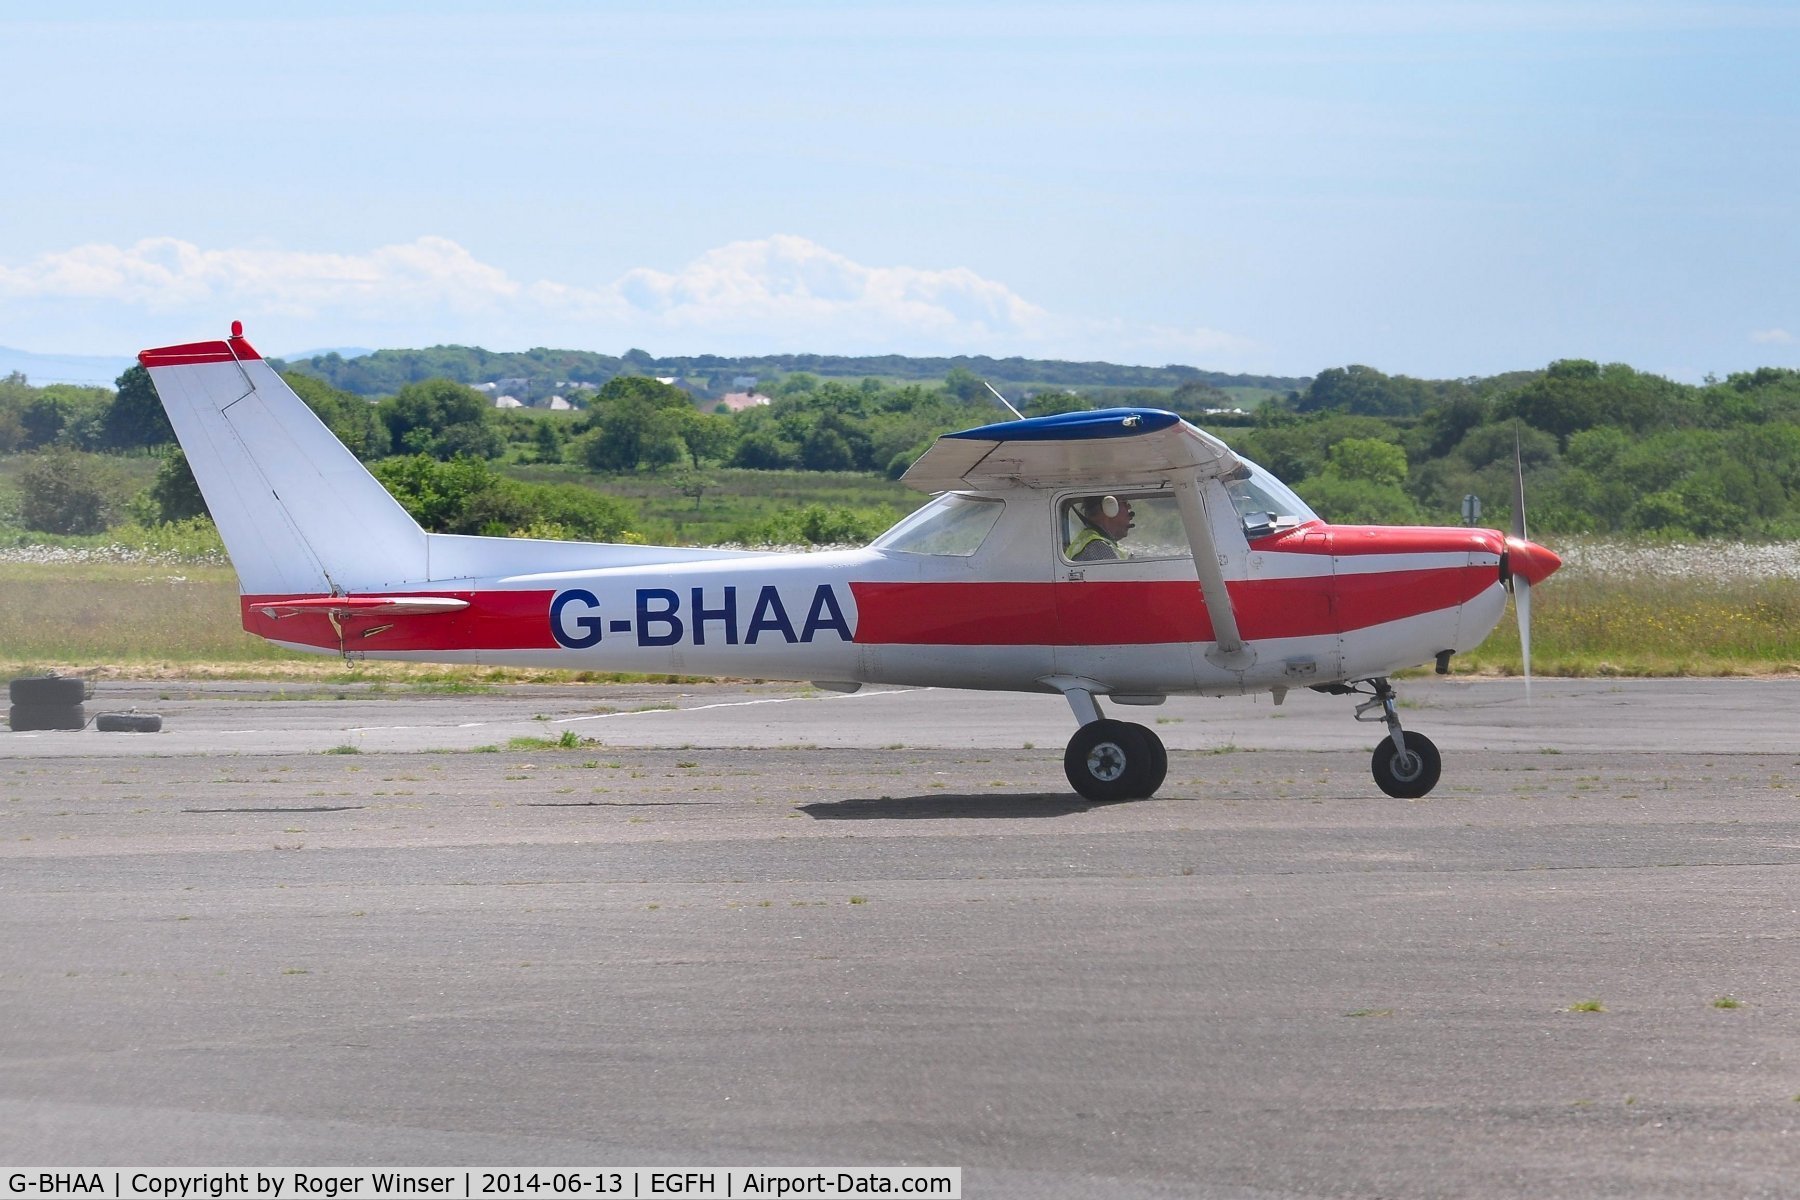 G-BHAA, 1978 Cessna 152 C/N 15281330, Visiting Cessna 152. Previously registered N49809.